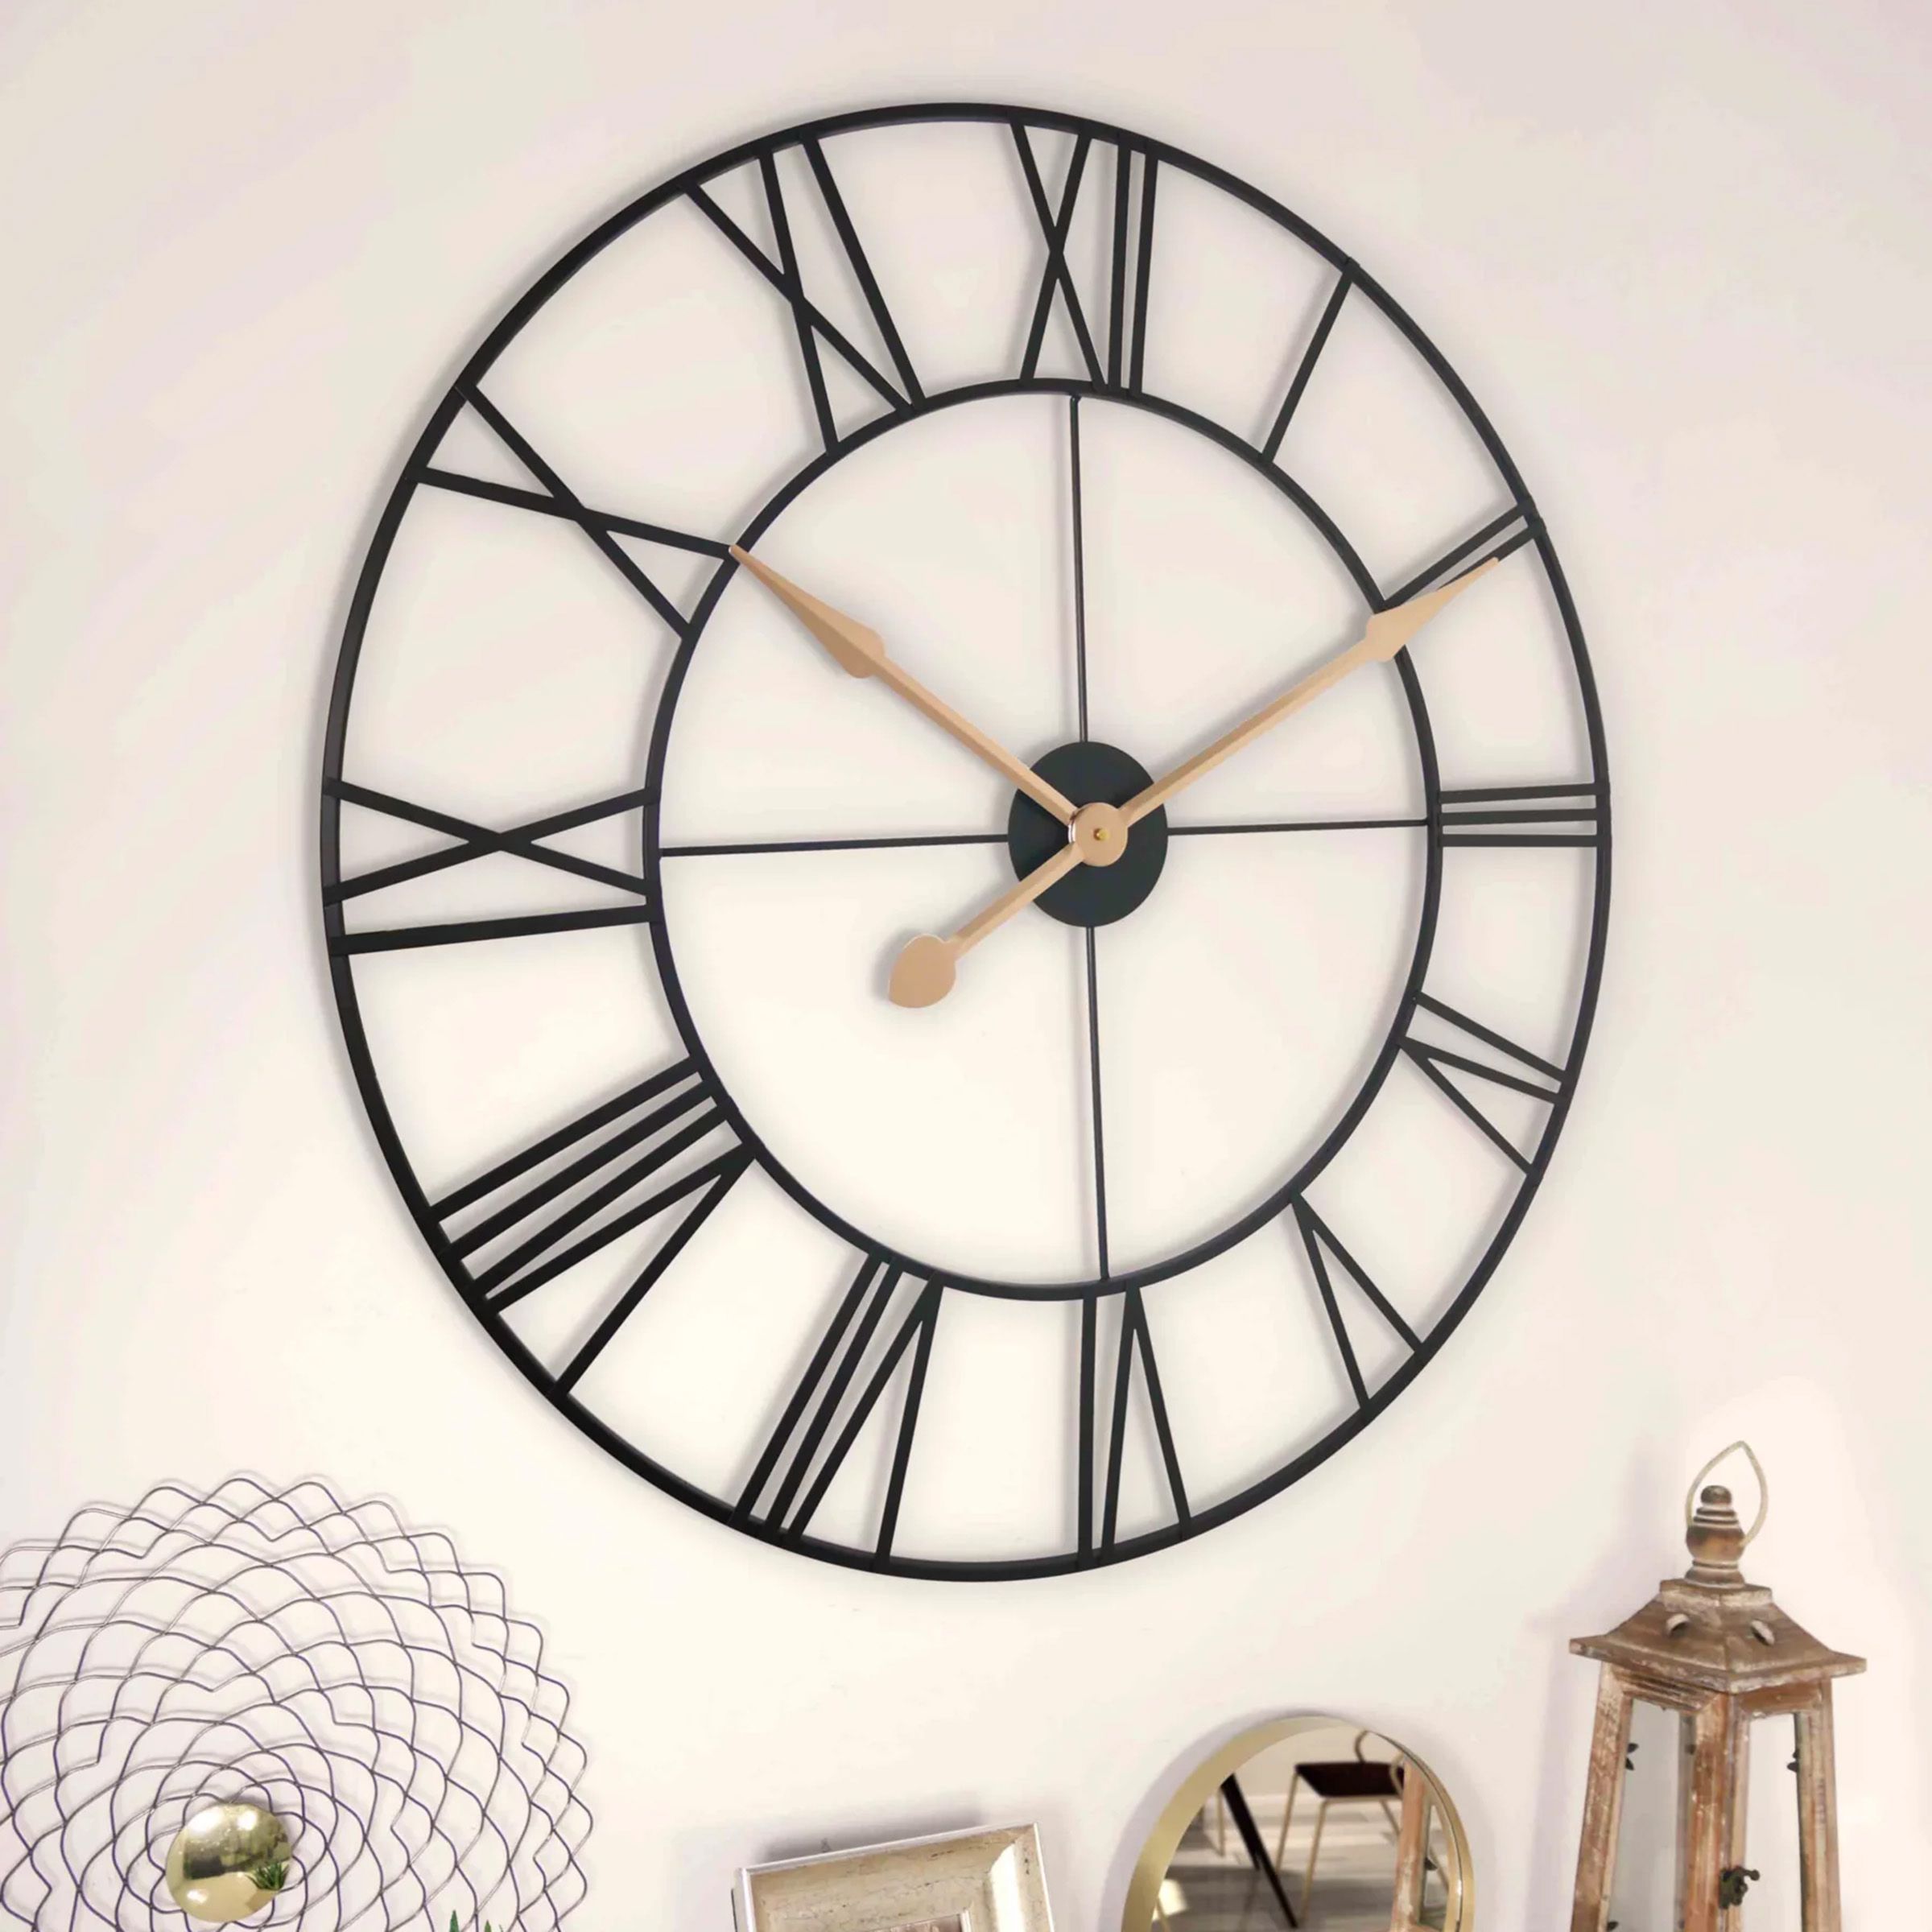 Large roman numeral cut-out clock face